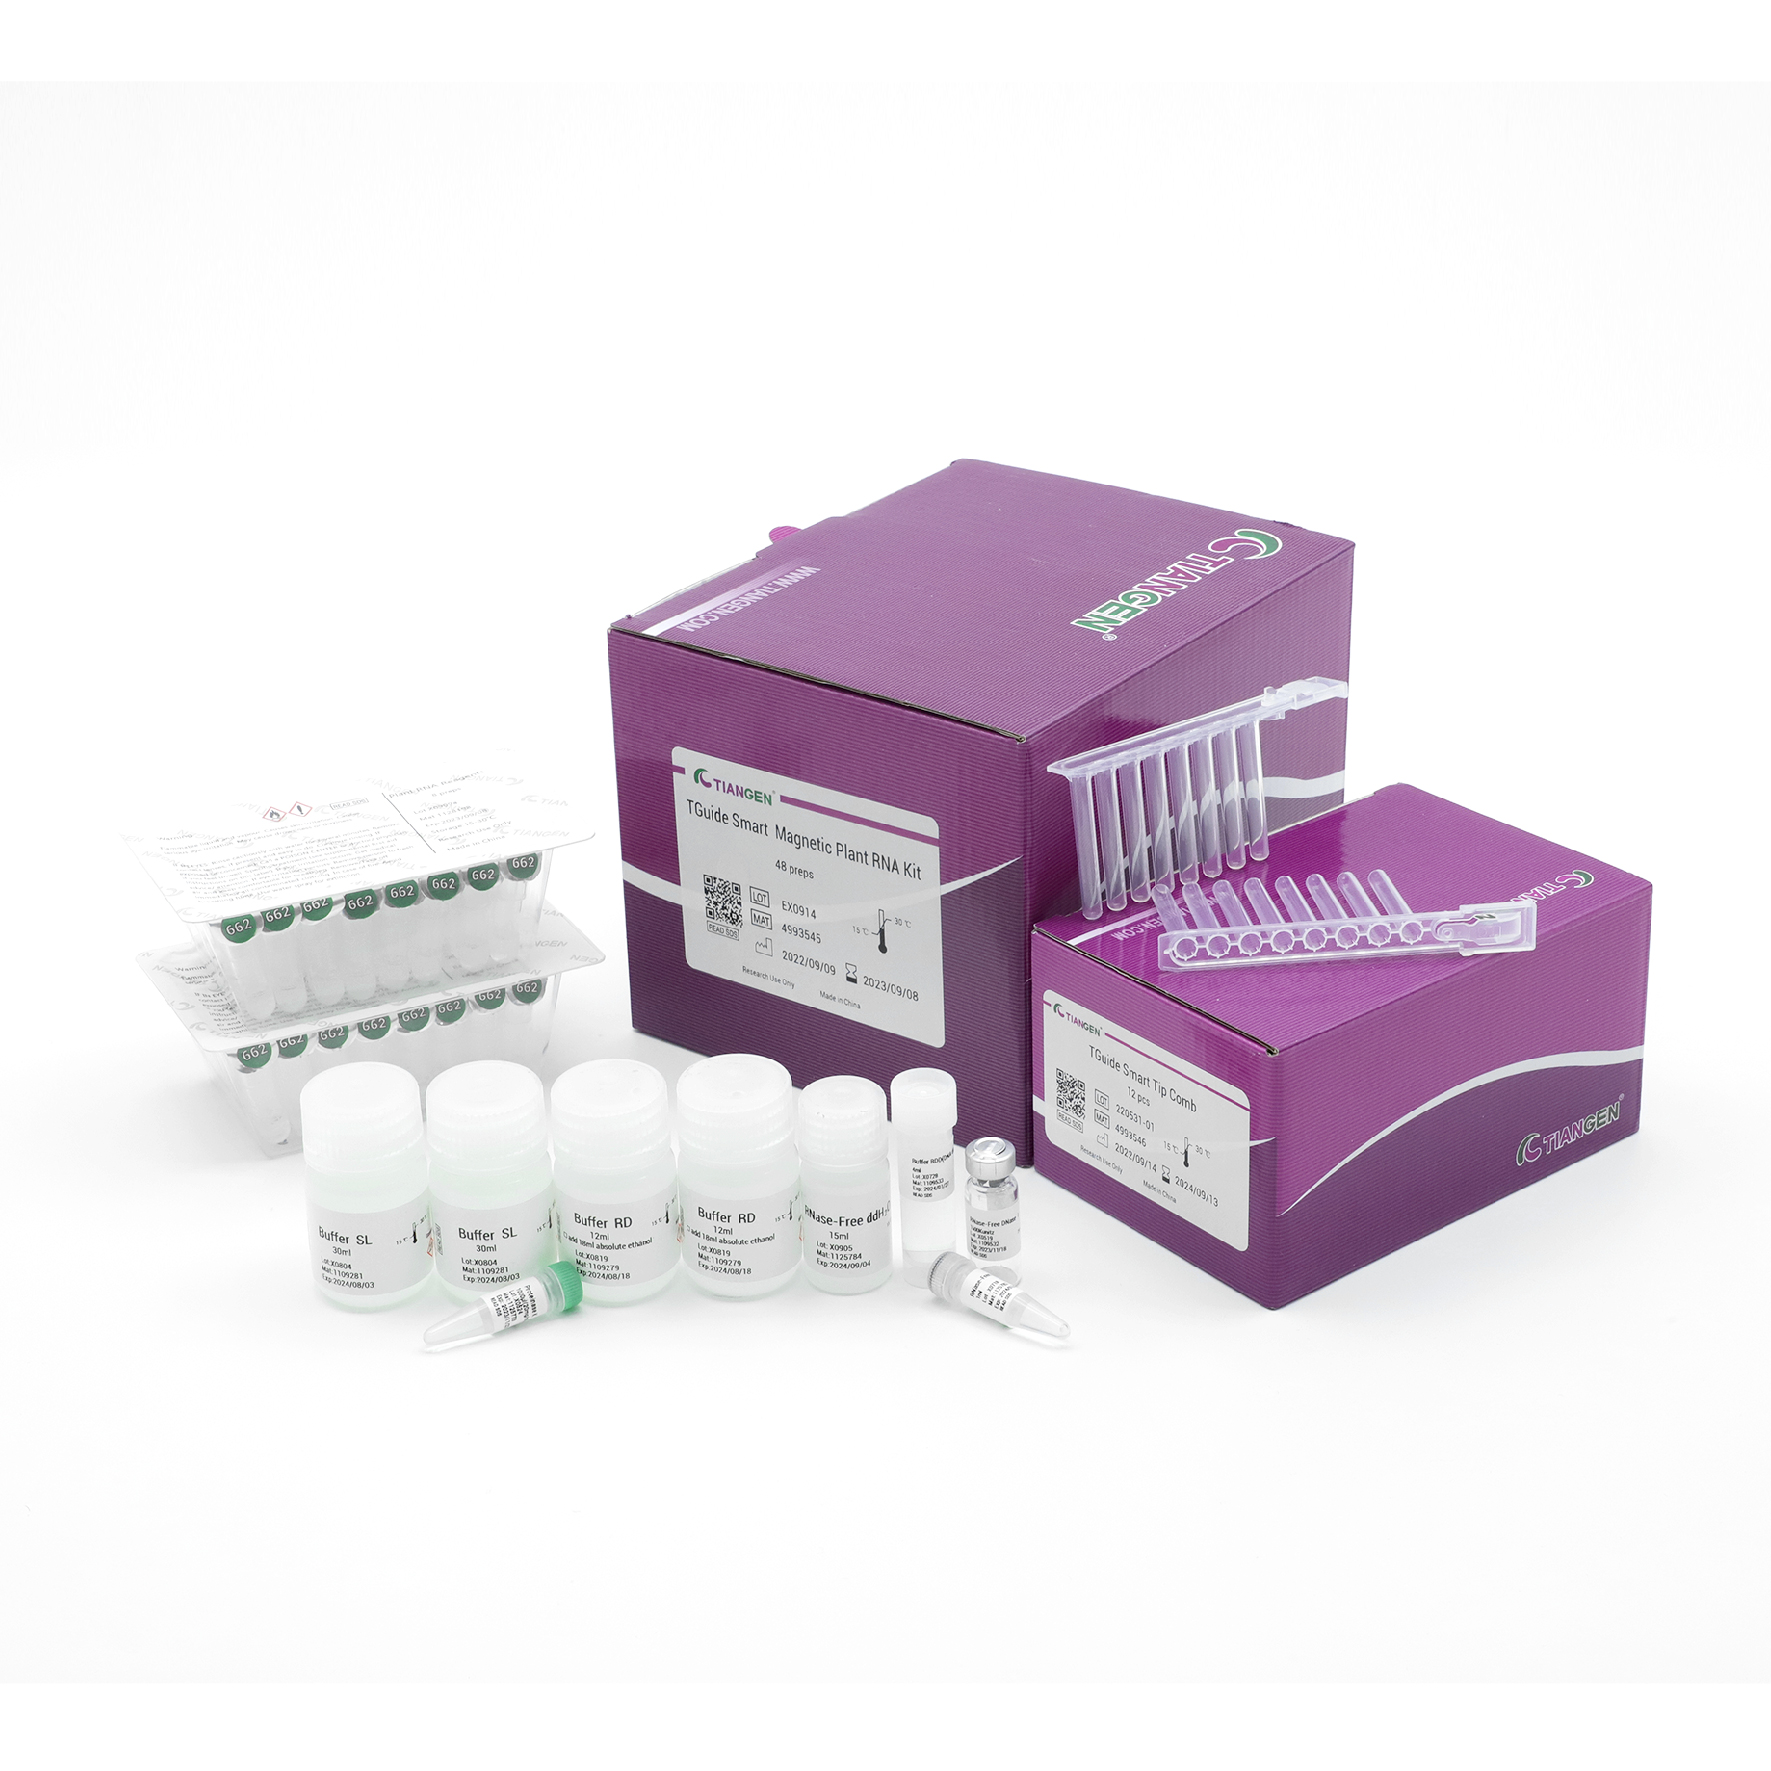 TGuide Smart Magnetic Plant RNA Kit Featured Image